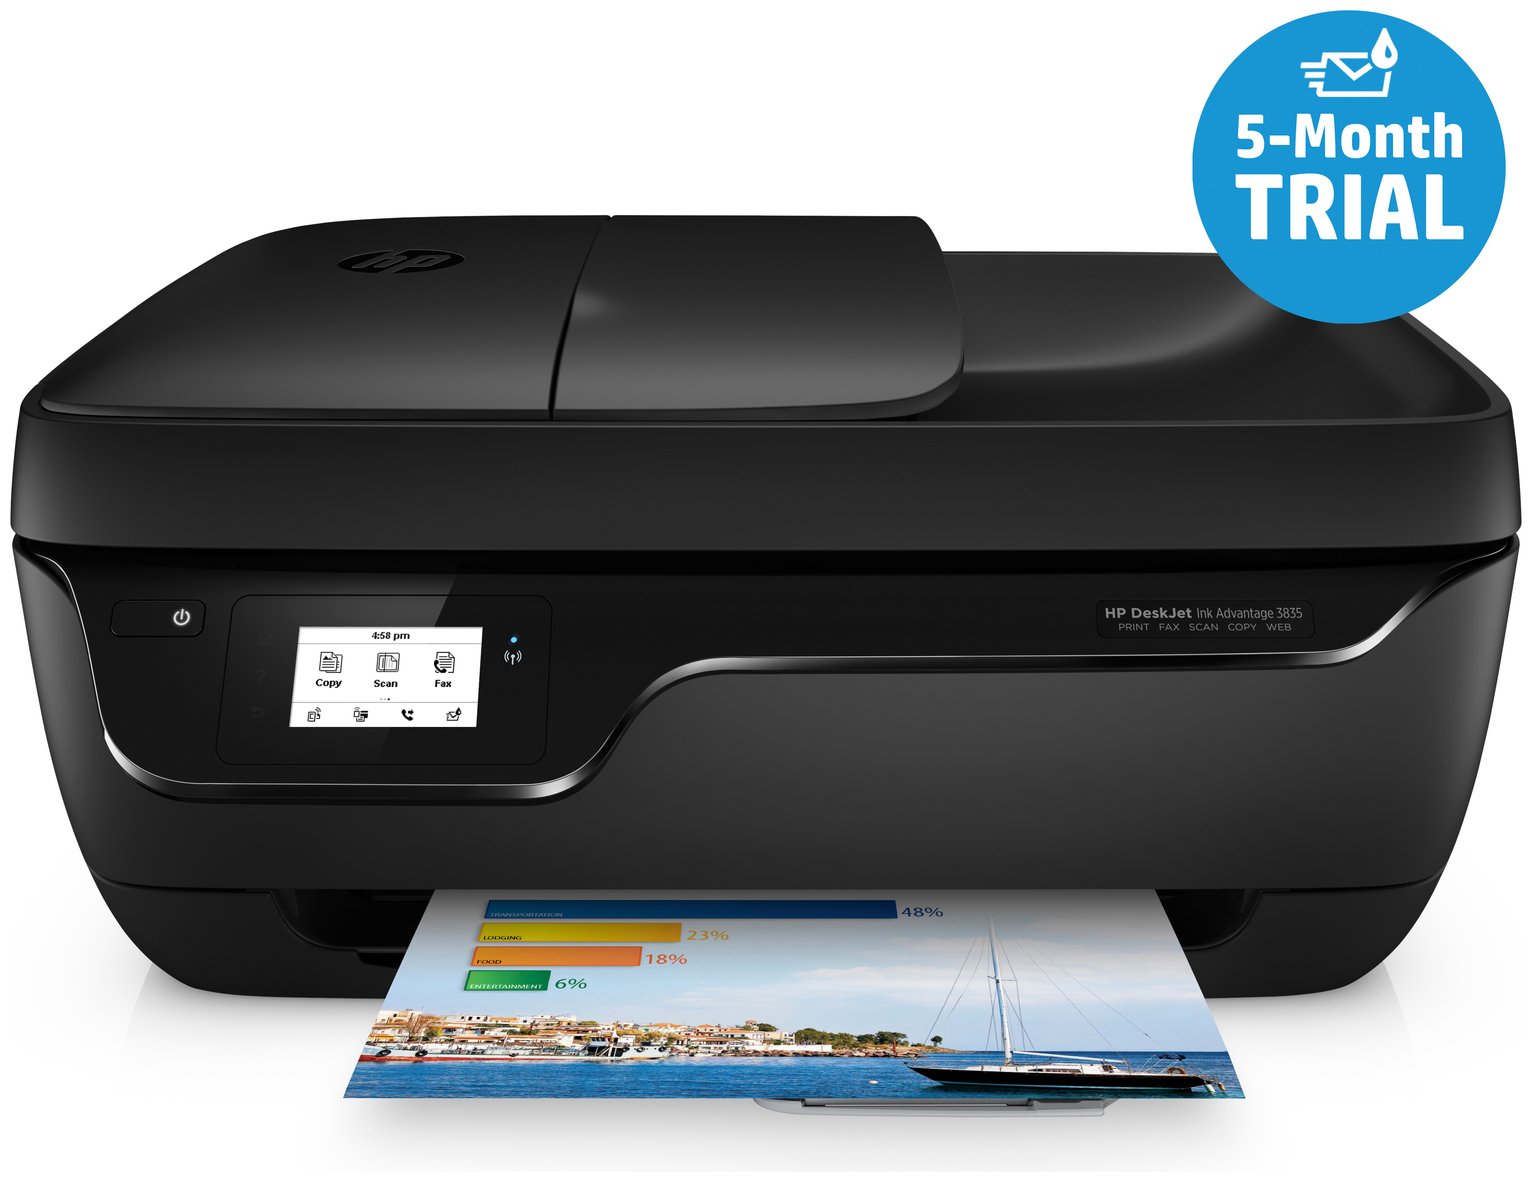 HP OfficeJet 3835 Wireless Printer & 5 Months Instant Ink Review